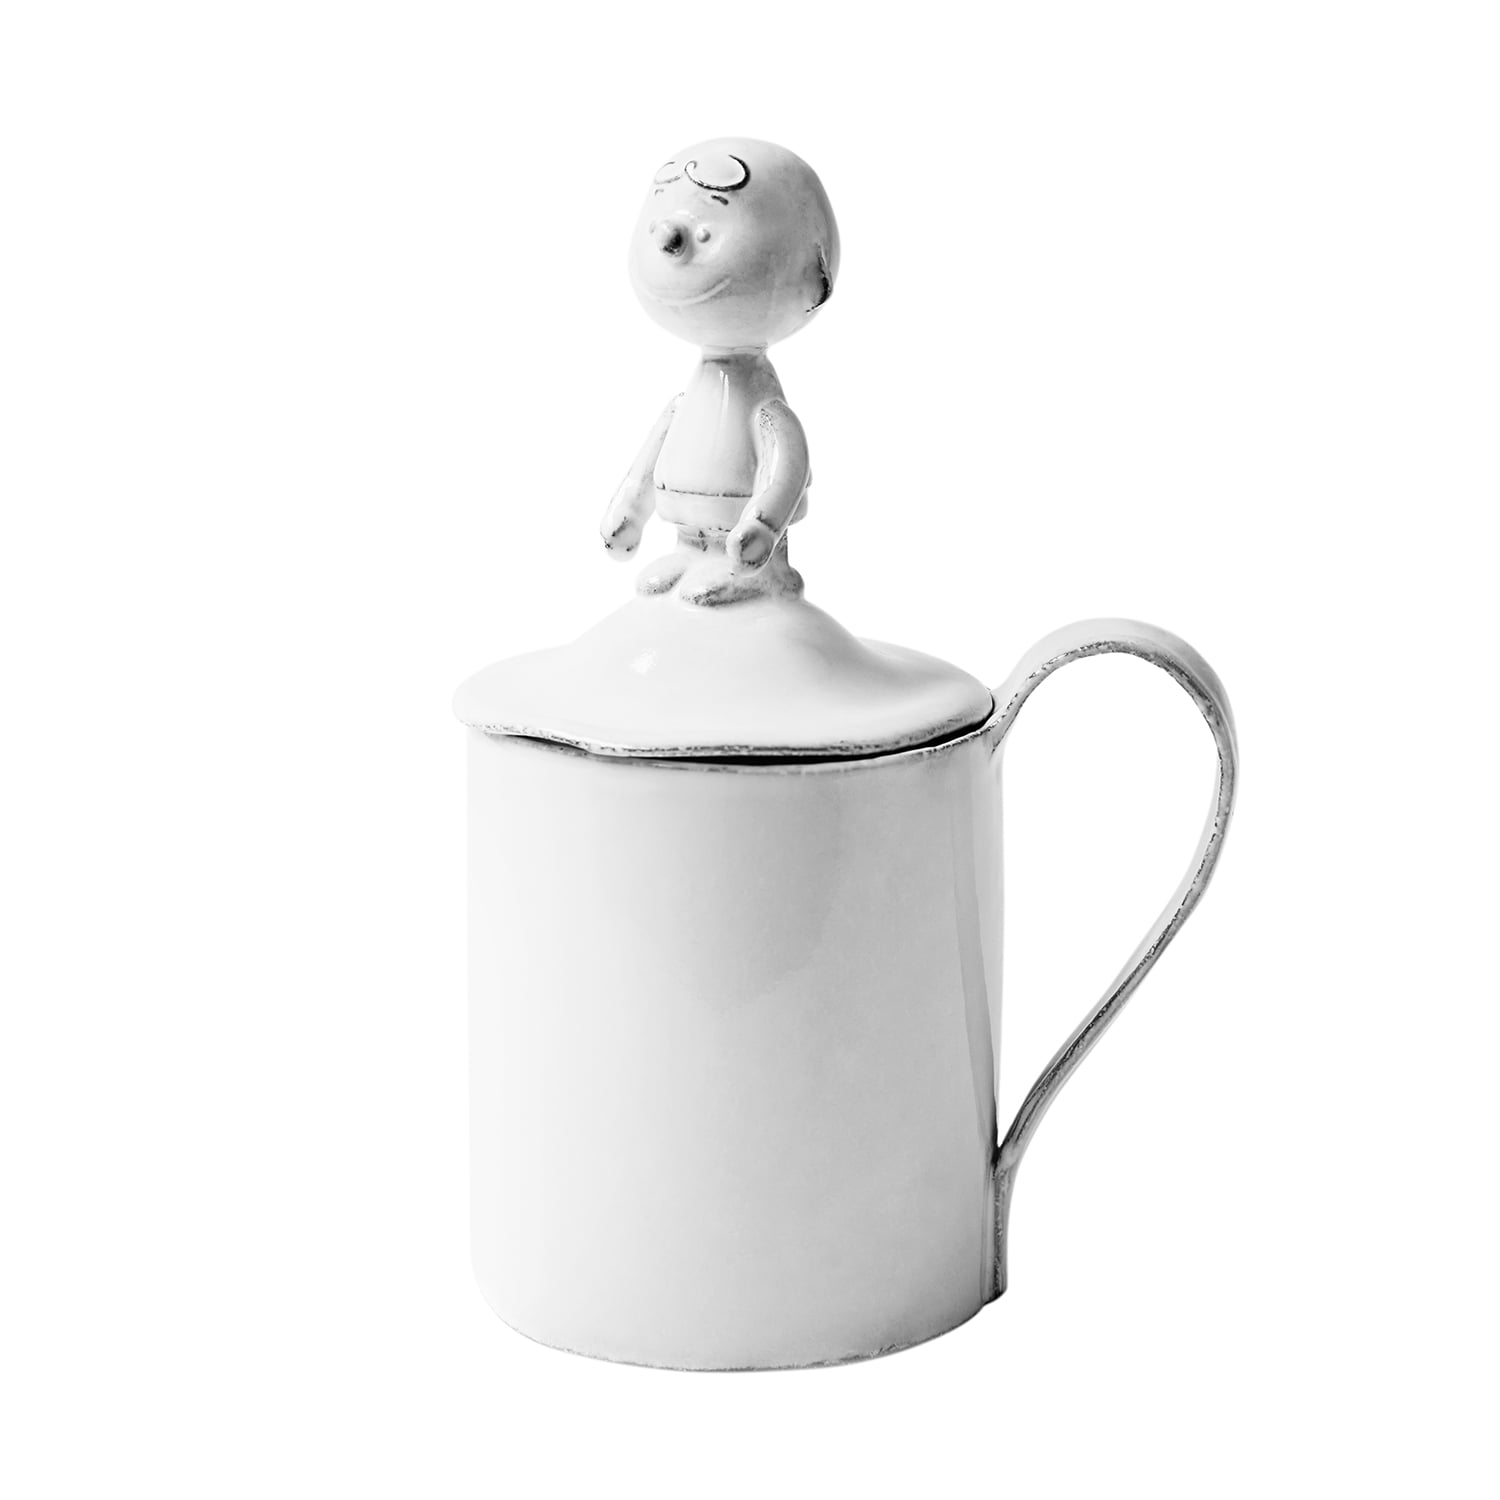 [Snoopy] Mug With Charlie Brown Cover top